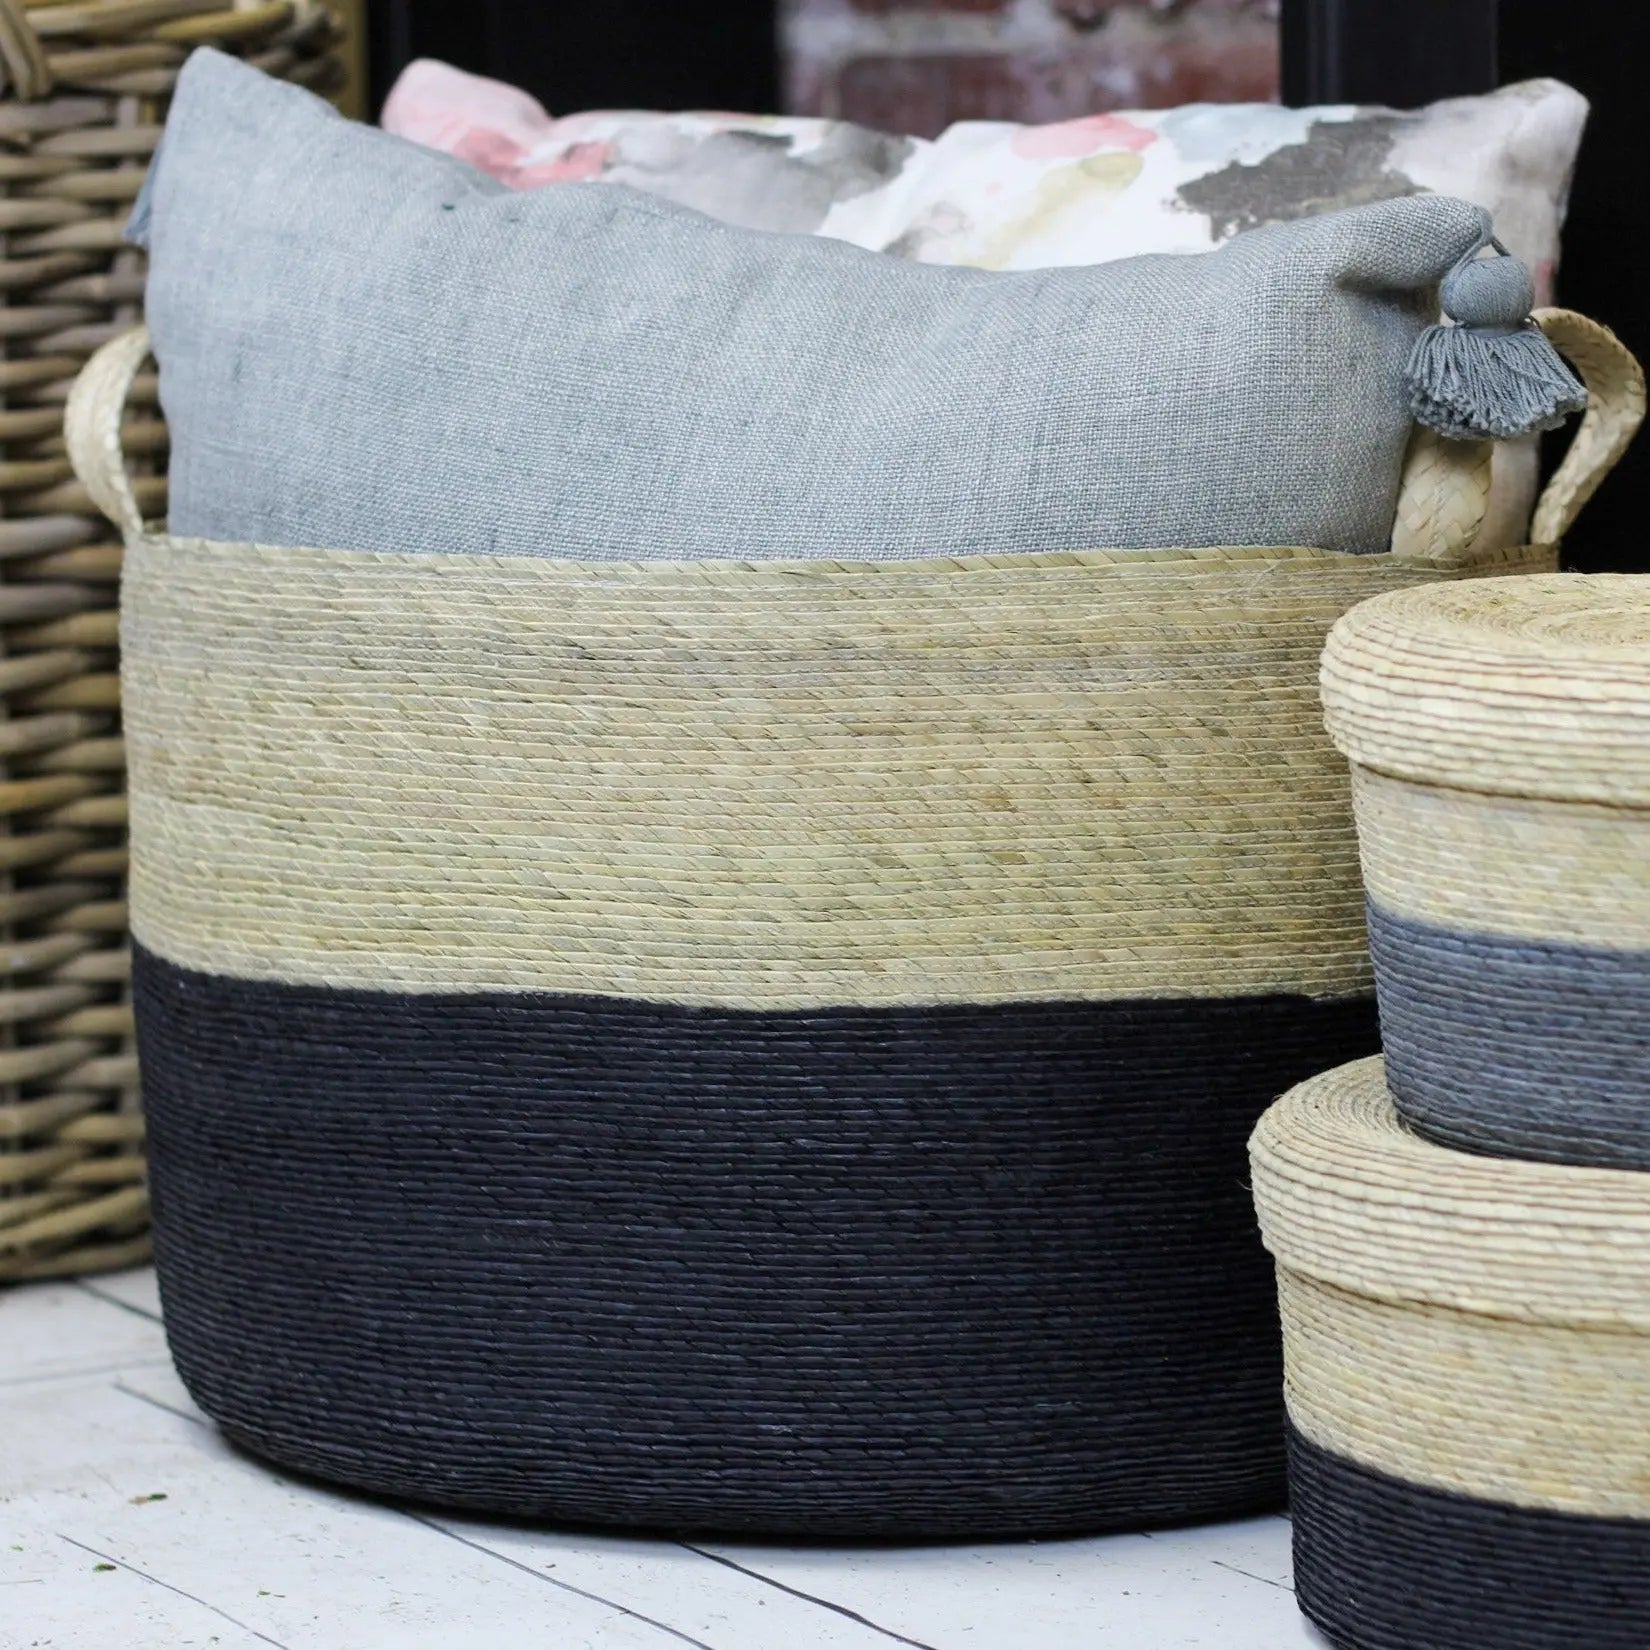 Tambo Basket in Carbon - Home Smith